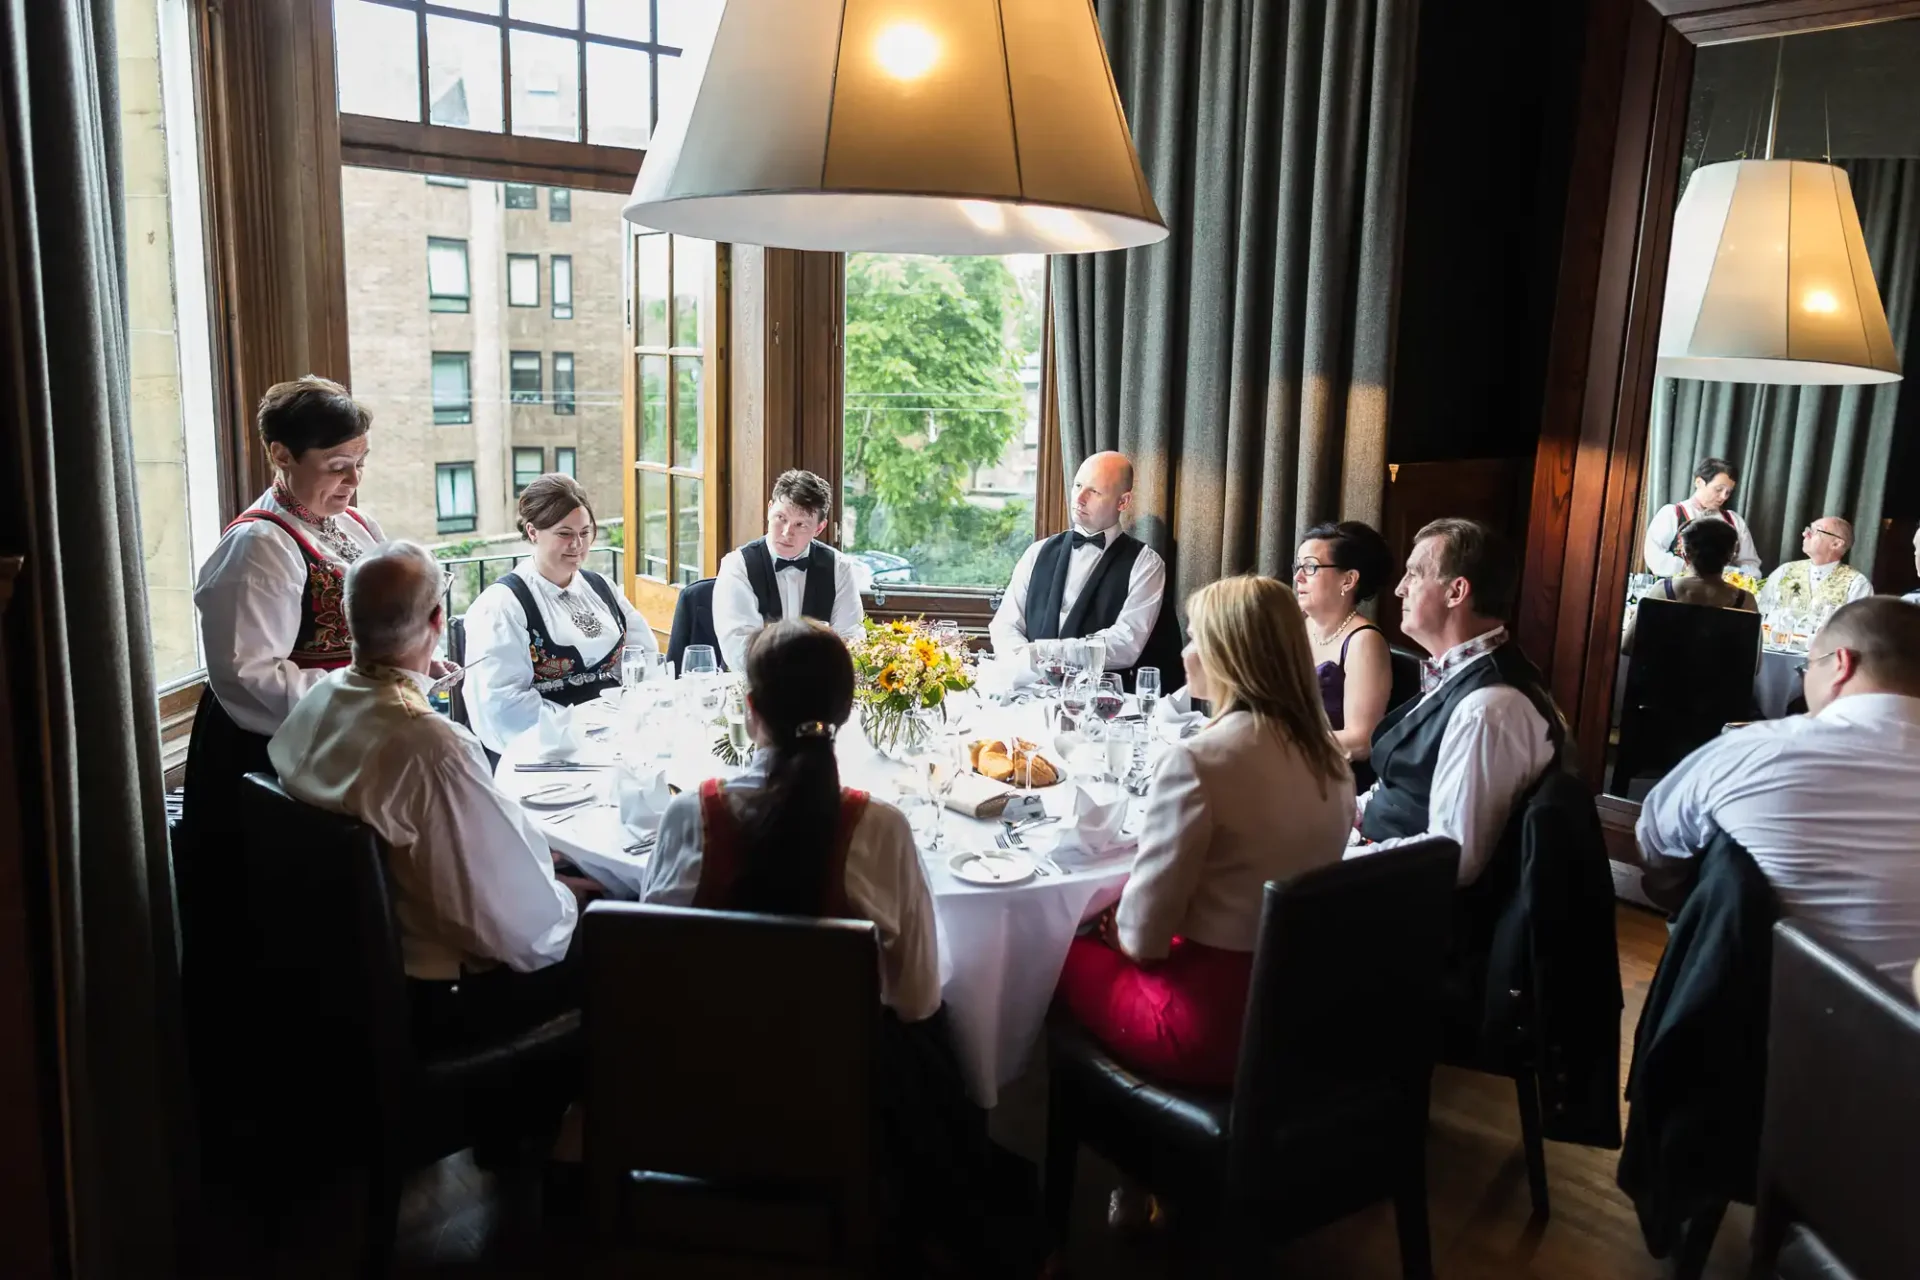 Waitstaff serving a formally dressed group at an elegant dining table in a restaurant with large windows and modern decor.